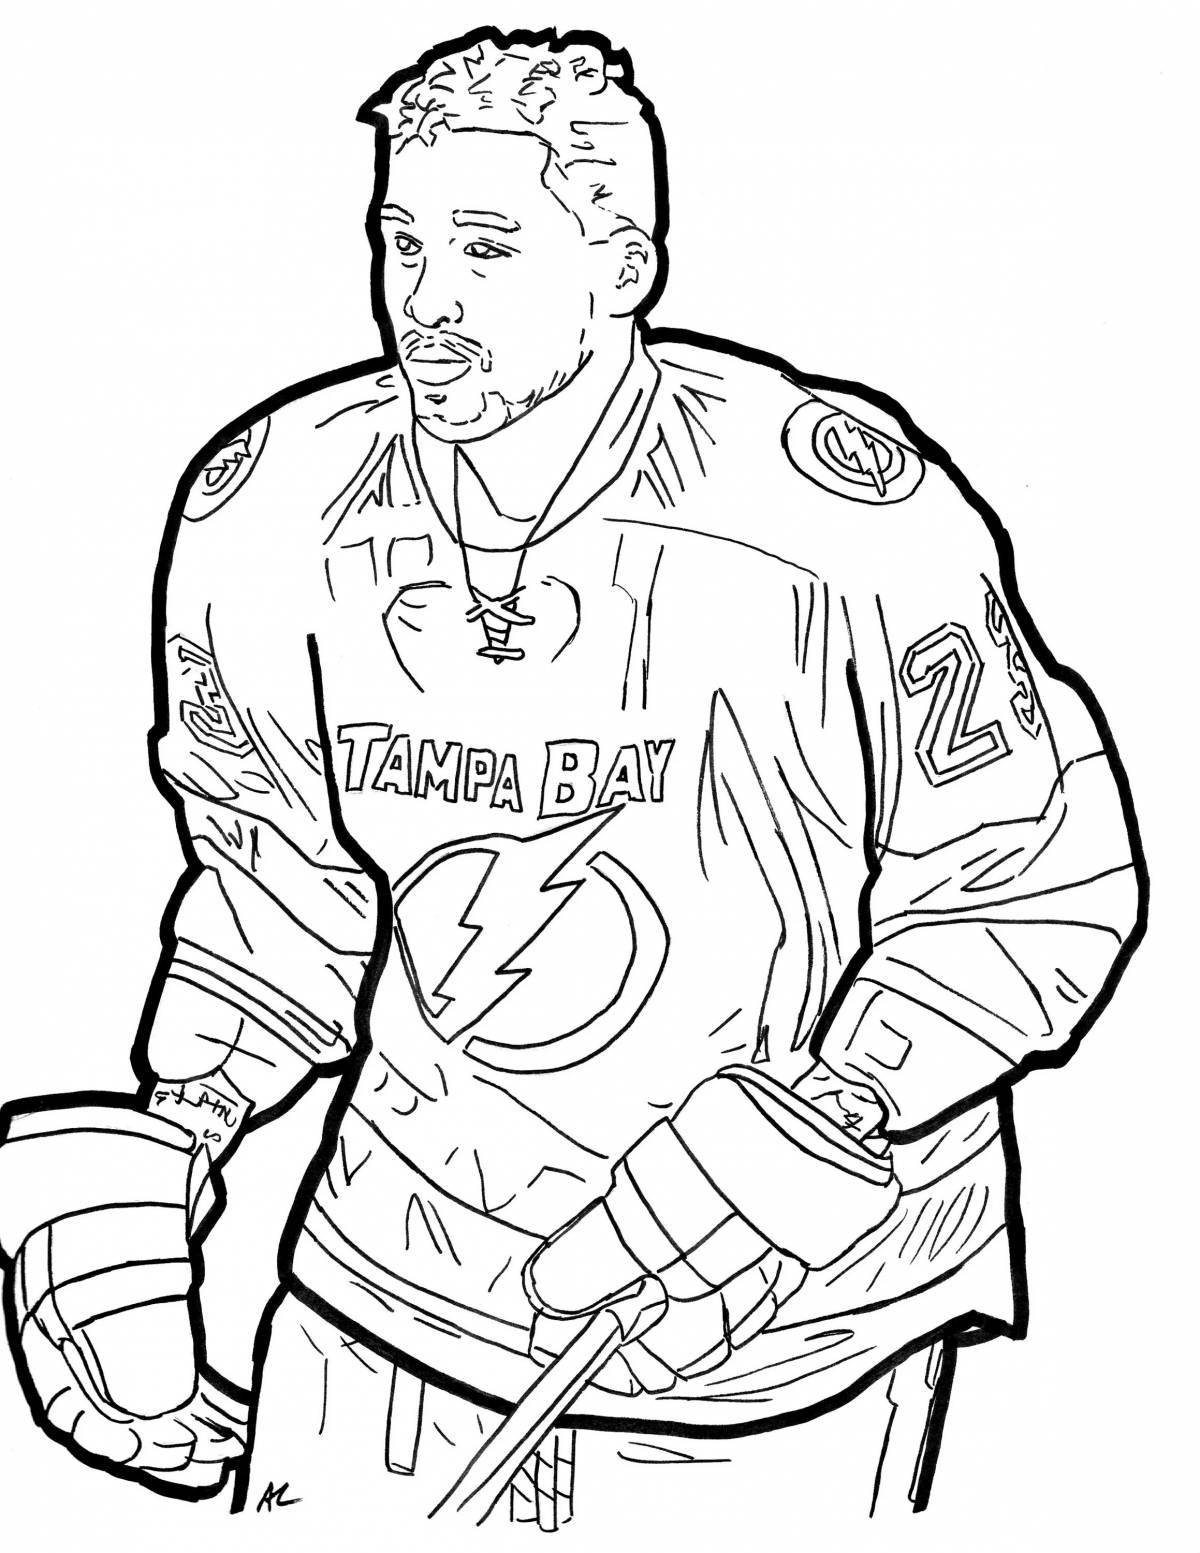 Great nhl hockey coloring book